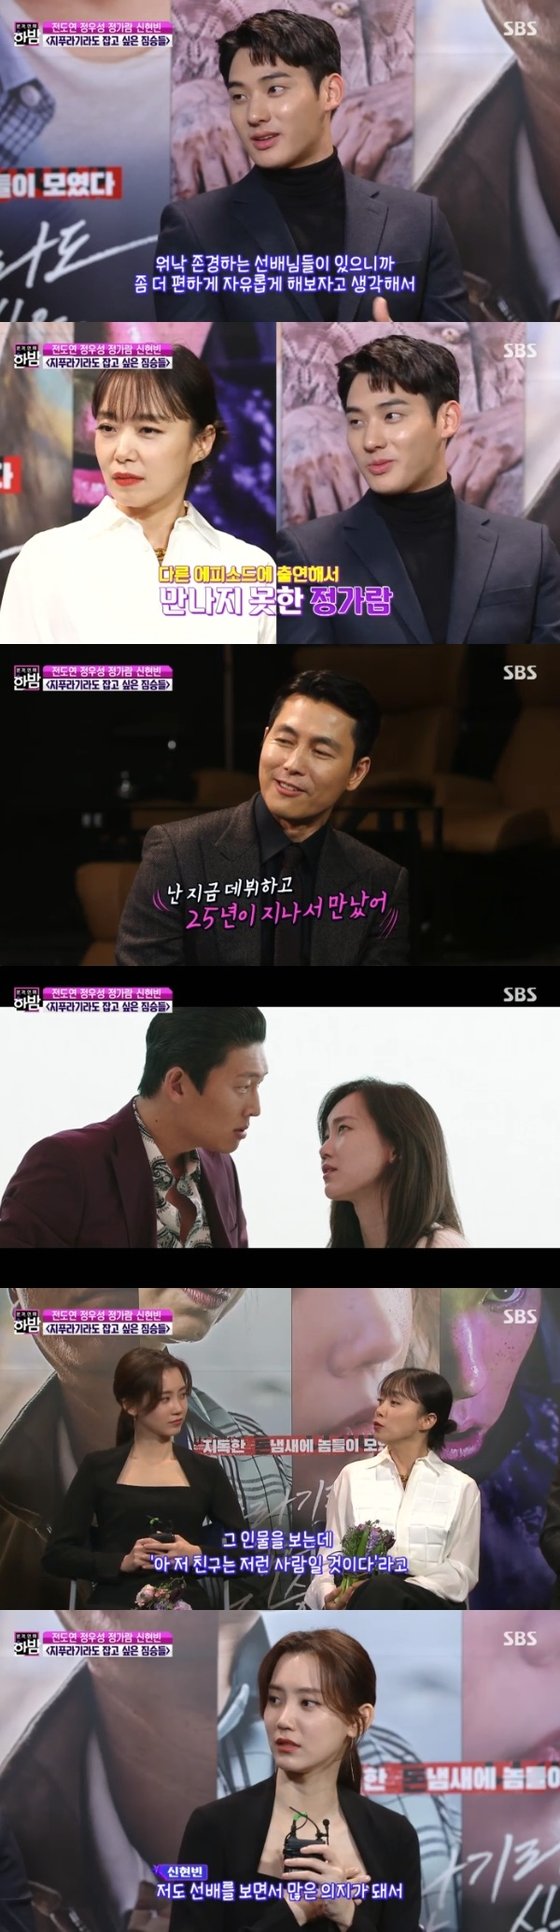 On SBS s Full Entertainment Midnight broadcast on the 22nd, the main characters of the movie The Animals (director Kim Yong-hoon) were interviewed by Jeon Do-yeon Jung Woo-sung Jung Ga-ram Shin Hyun-bin.Jung Ga-ram said, I was actually worried, but I was rather comfortable because I have a lot of respectable seniors.Jung Ga-ram has revealed himself as a fan of Jeon Do-yeon since his debut.Jung Ga-ram said, Unfortunately, I did not have a chance to breathe like my senior this time. Jung Woo-sung said, I have to wait a long time.I met 25 years later, he replied and laughed.As for Shin Hyun-bin, I think I have a mask that can perform various acts. Jeon Do-yeon mentioned the transformation starring Shin Hyun-bin, saying, I thought (Shin Hyun-bin) was such a real character.I was so good at acting that I thought that Friend would be such a person.Shin Hyun-bin added: Youve been a real will on the field, and its been very solid - theres really a lot of fun memories left.Photo: SBS broadcast capture